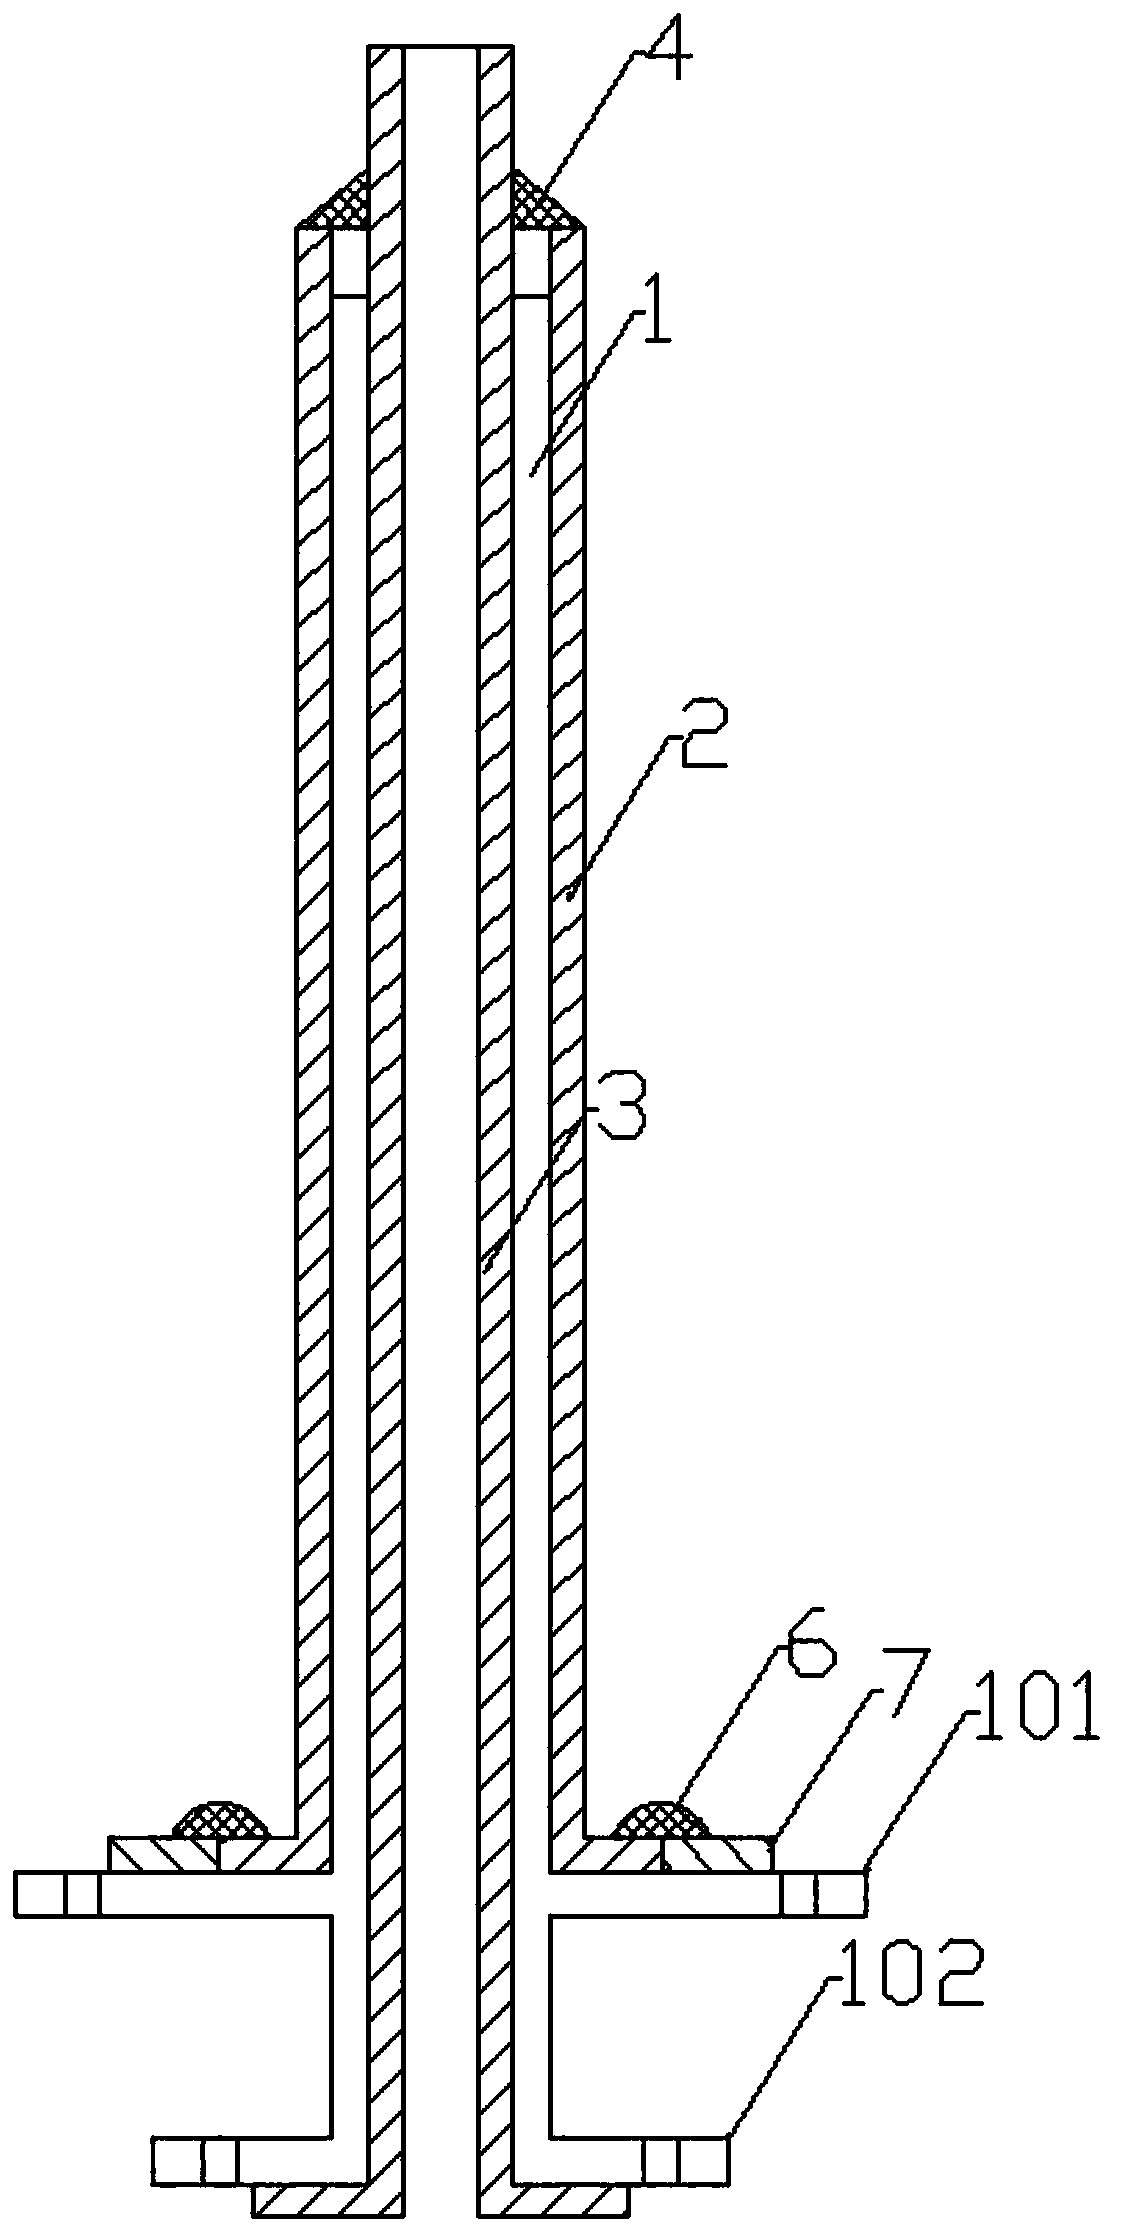 Forming process for teflon inside and outside linings of chlorine through pipe